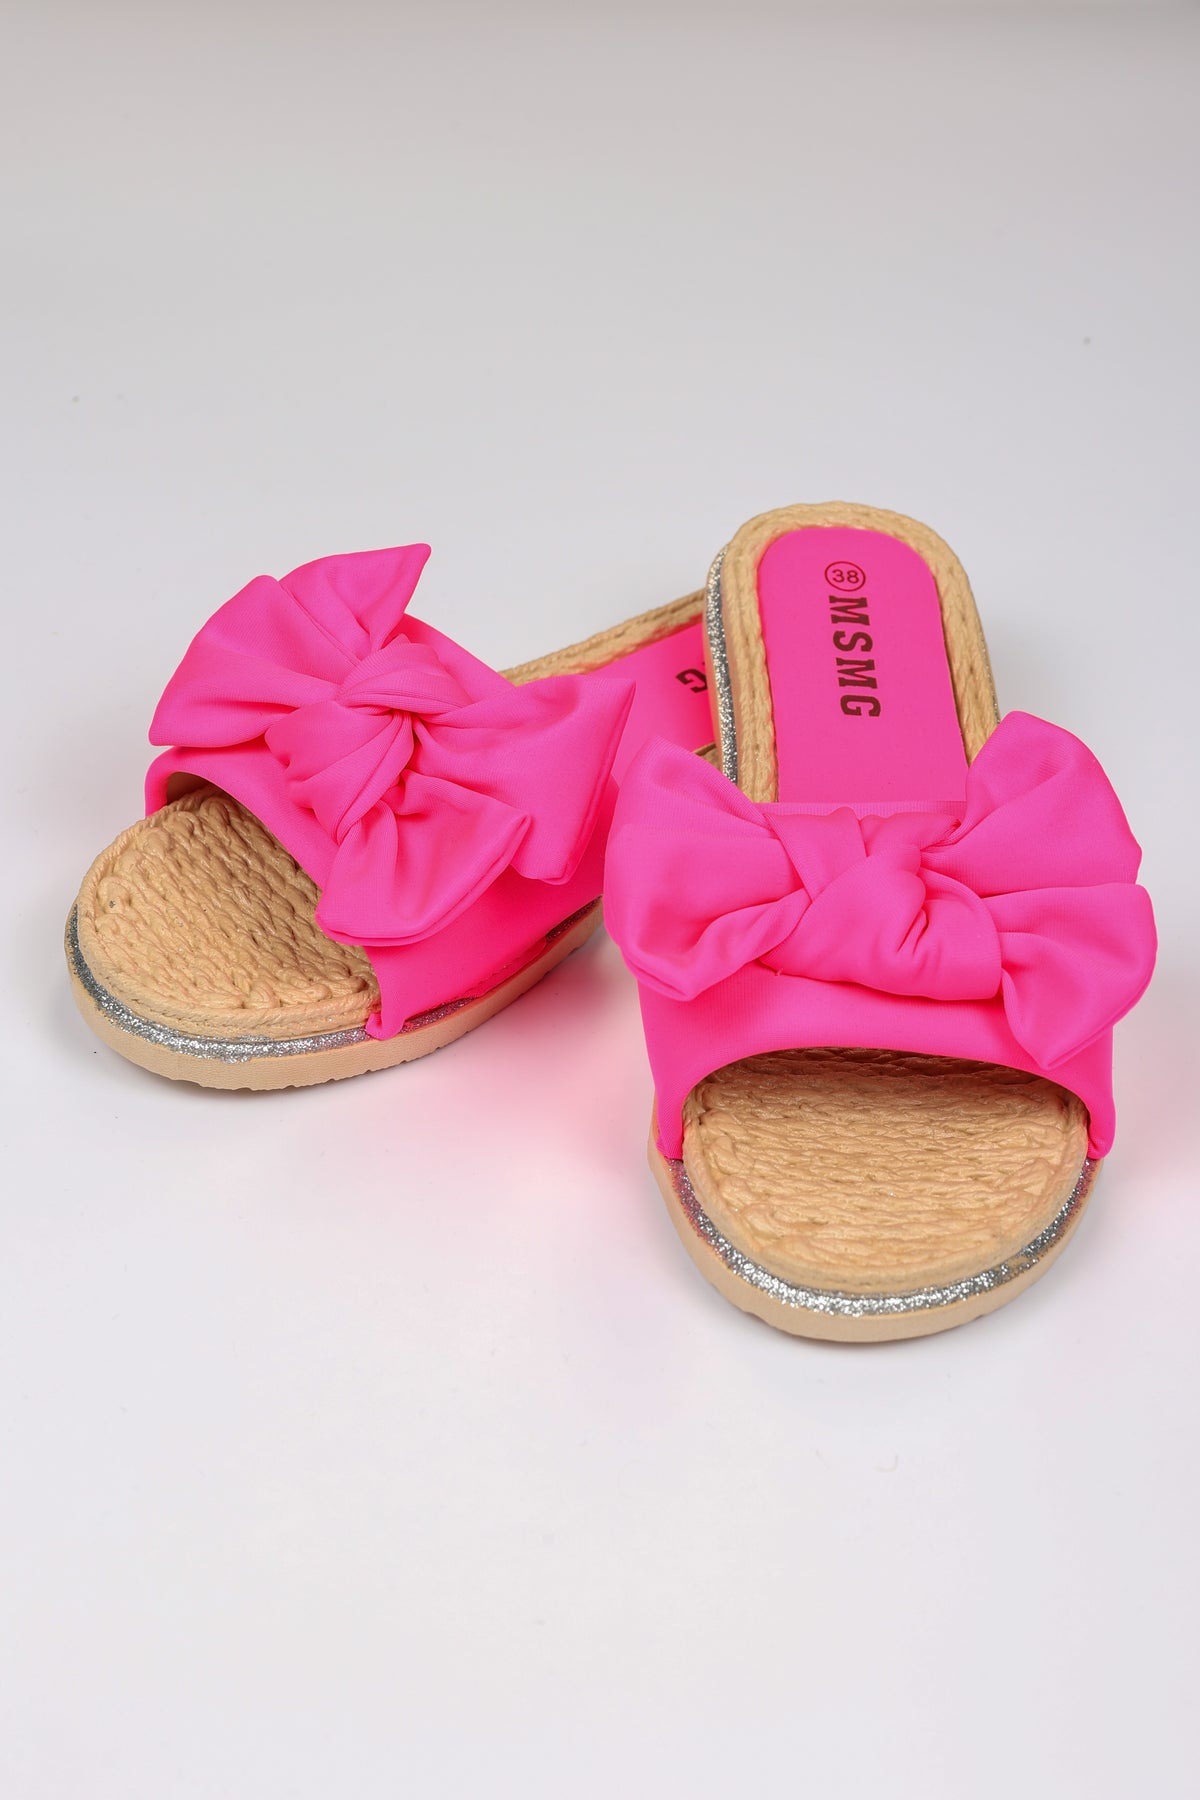 Cute Silky Material Sliders Bow Pink